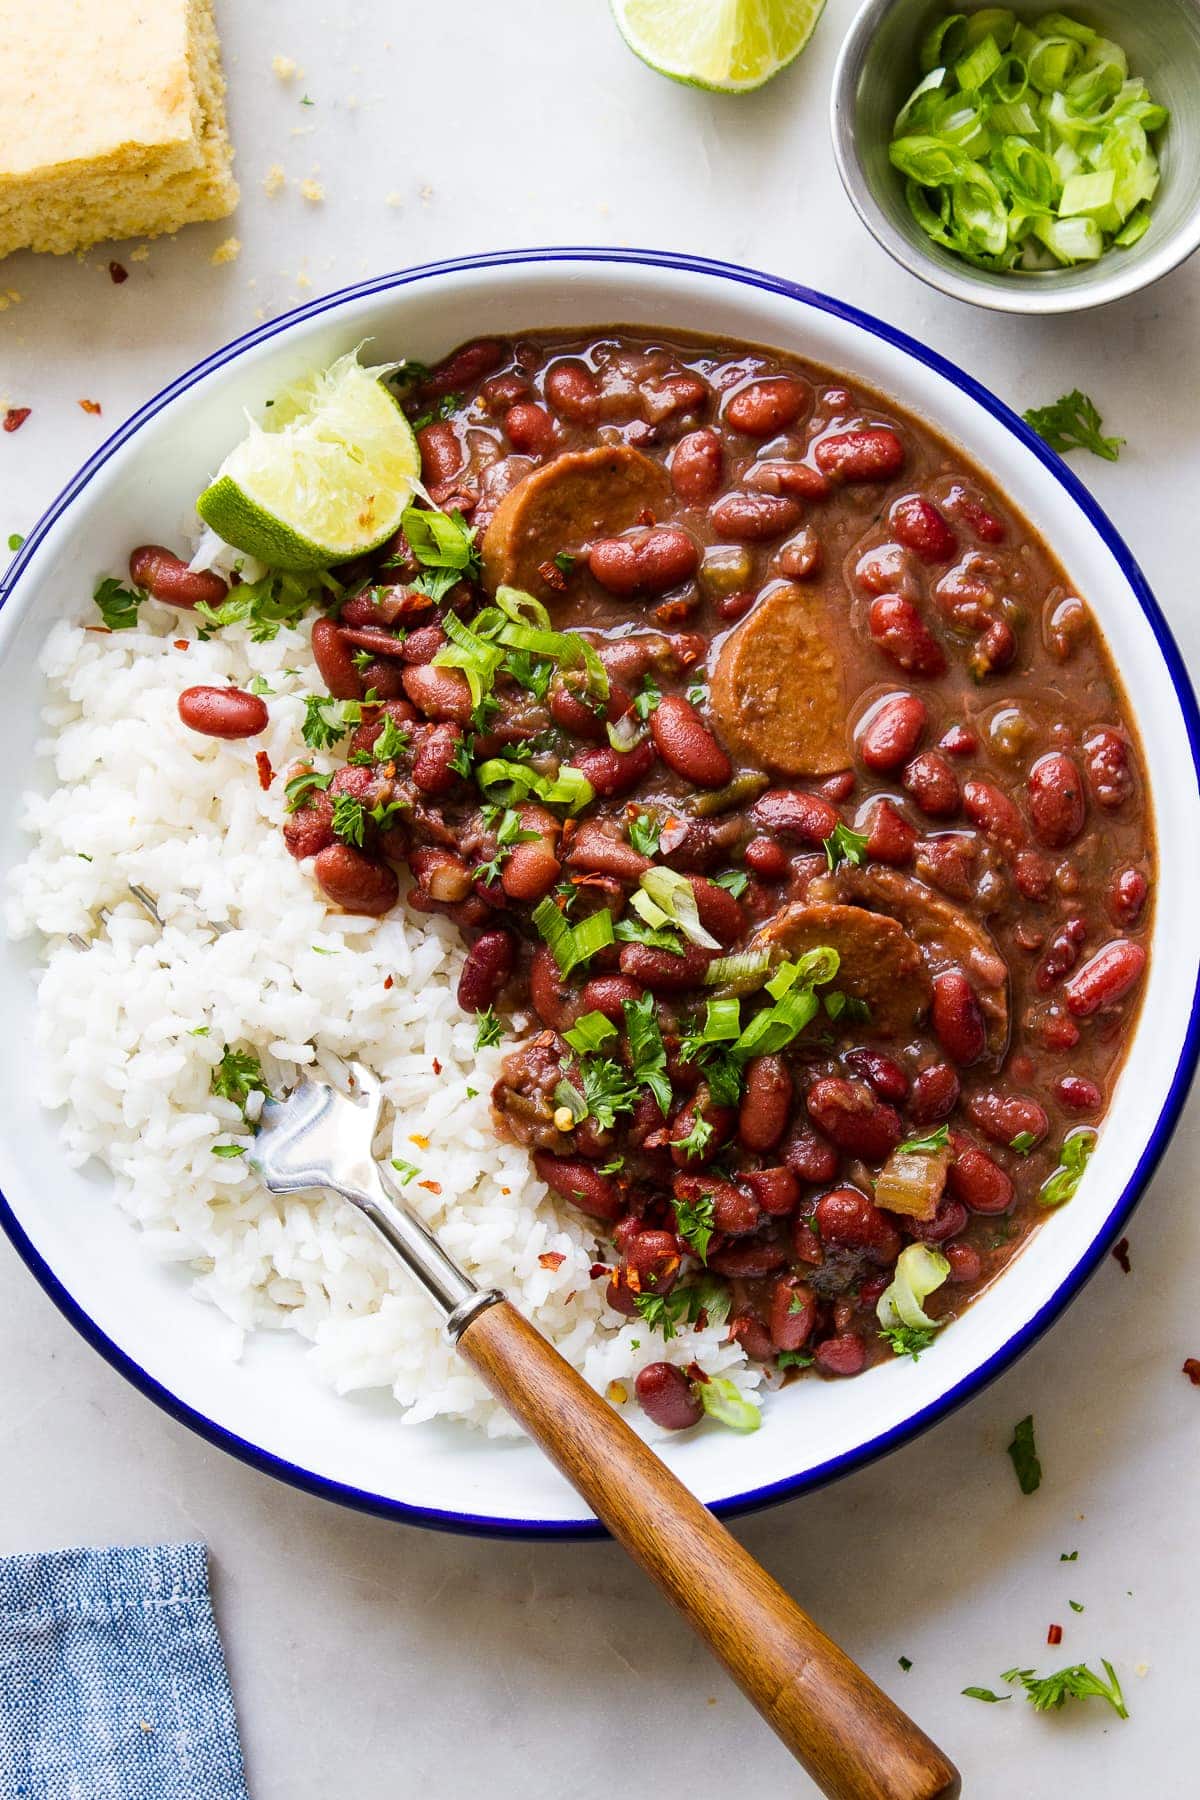 Vegetarian Red Beans And Rice Recipe - Image Of Food Recipe